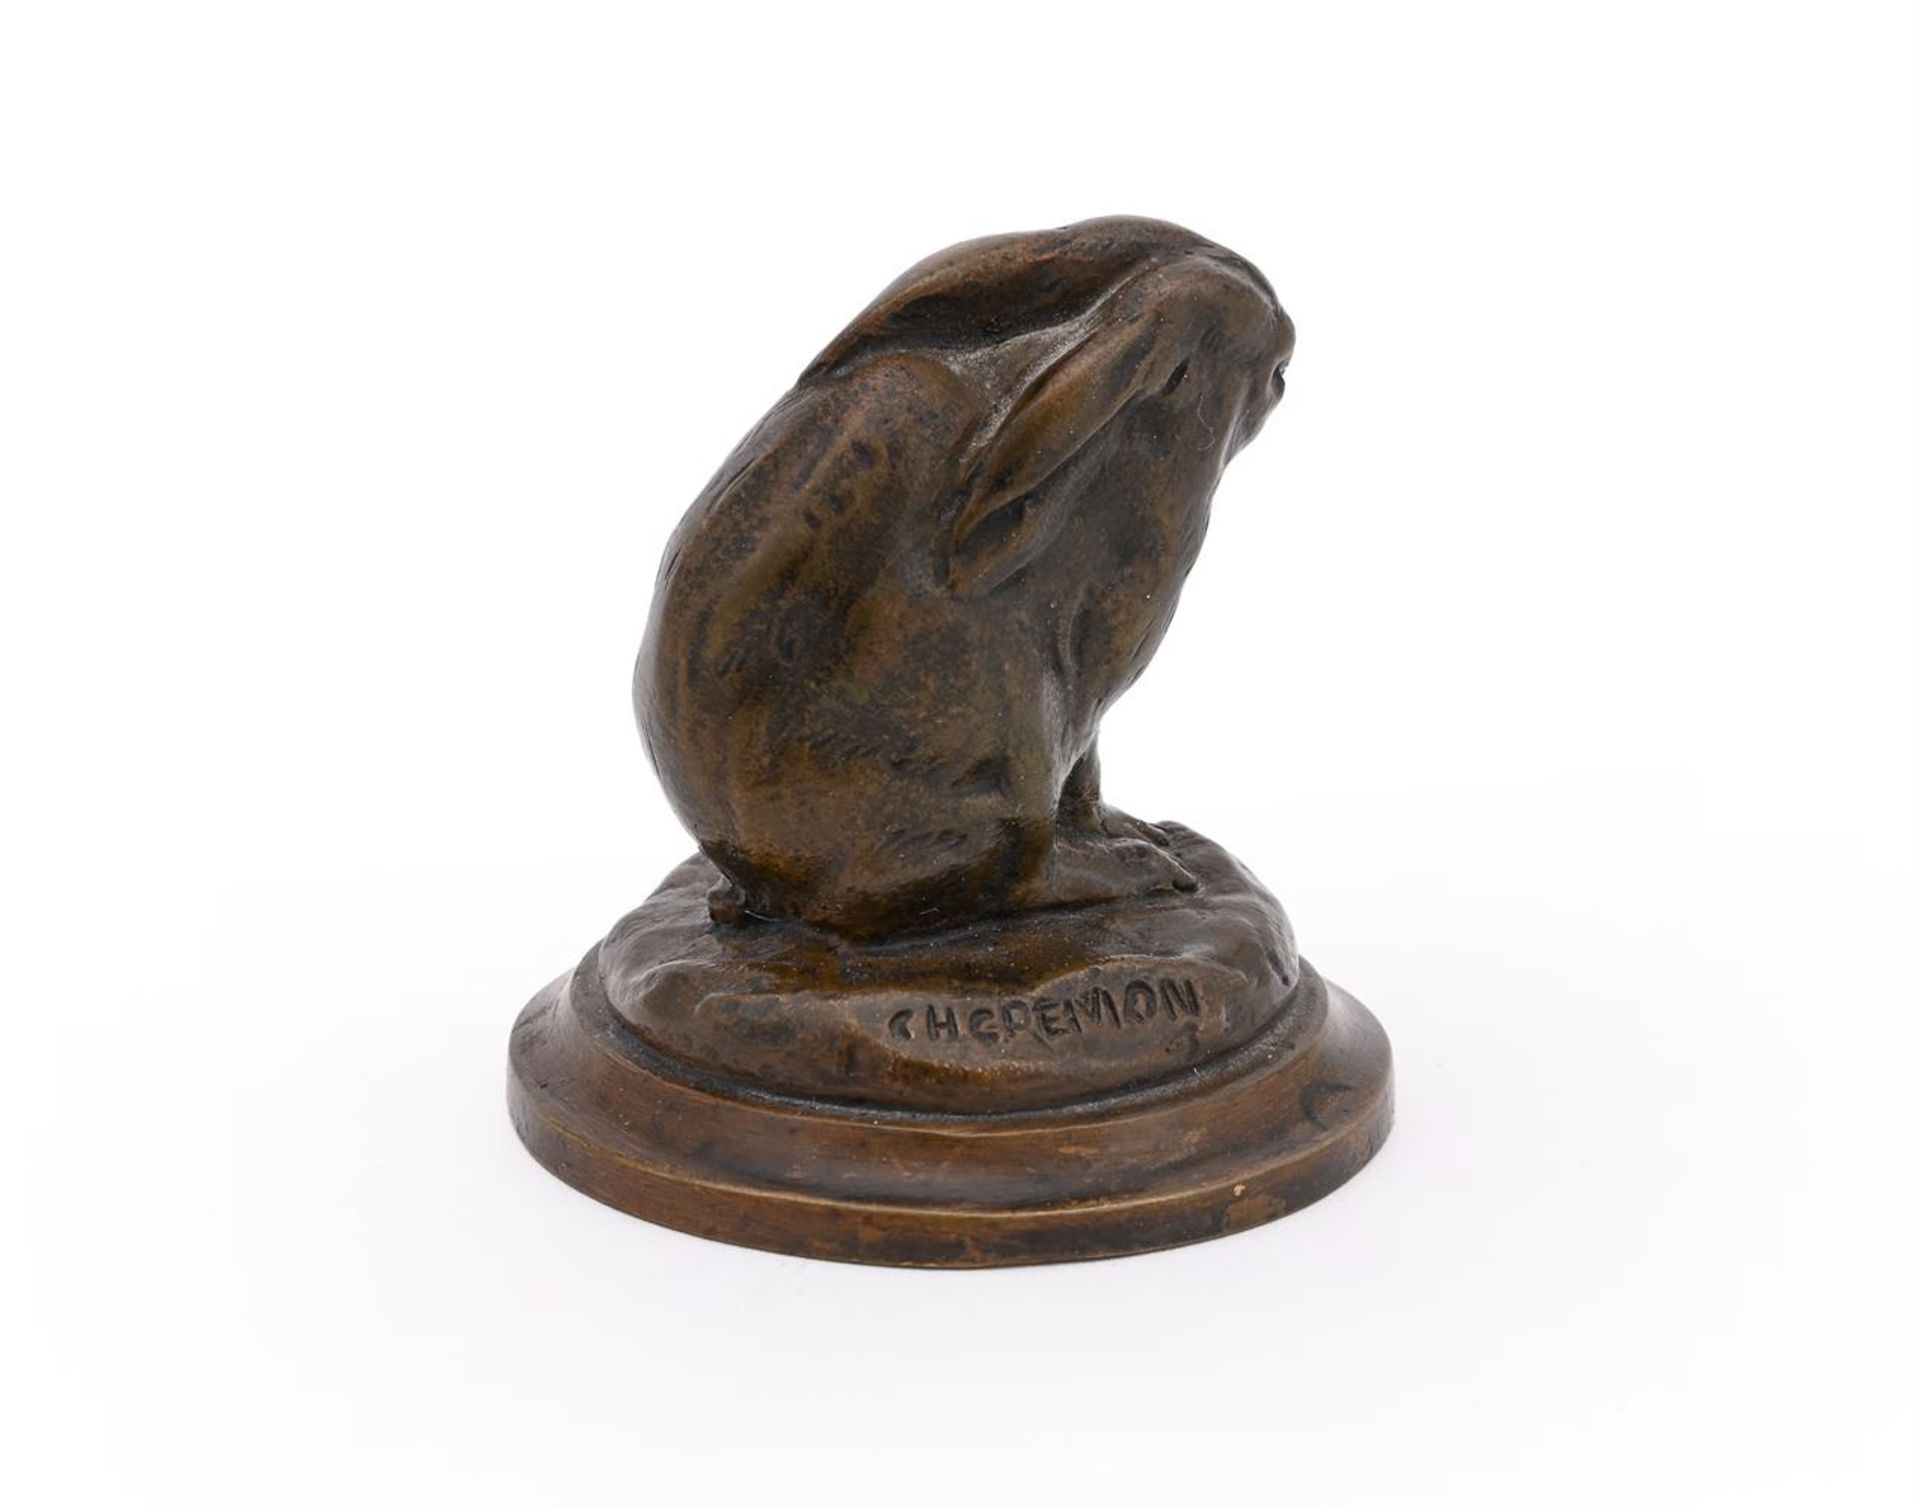 CHARLES GREMION (FRENCH, 19TH/20TH CENTURY), A BRONZE MODEL OF A RABBIT GROOMING - Image 2 of 4